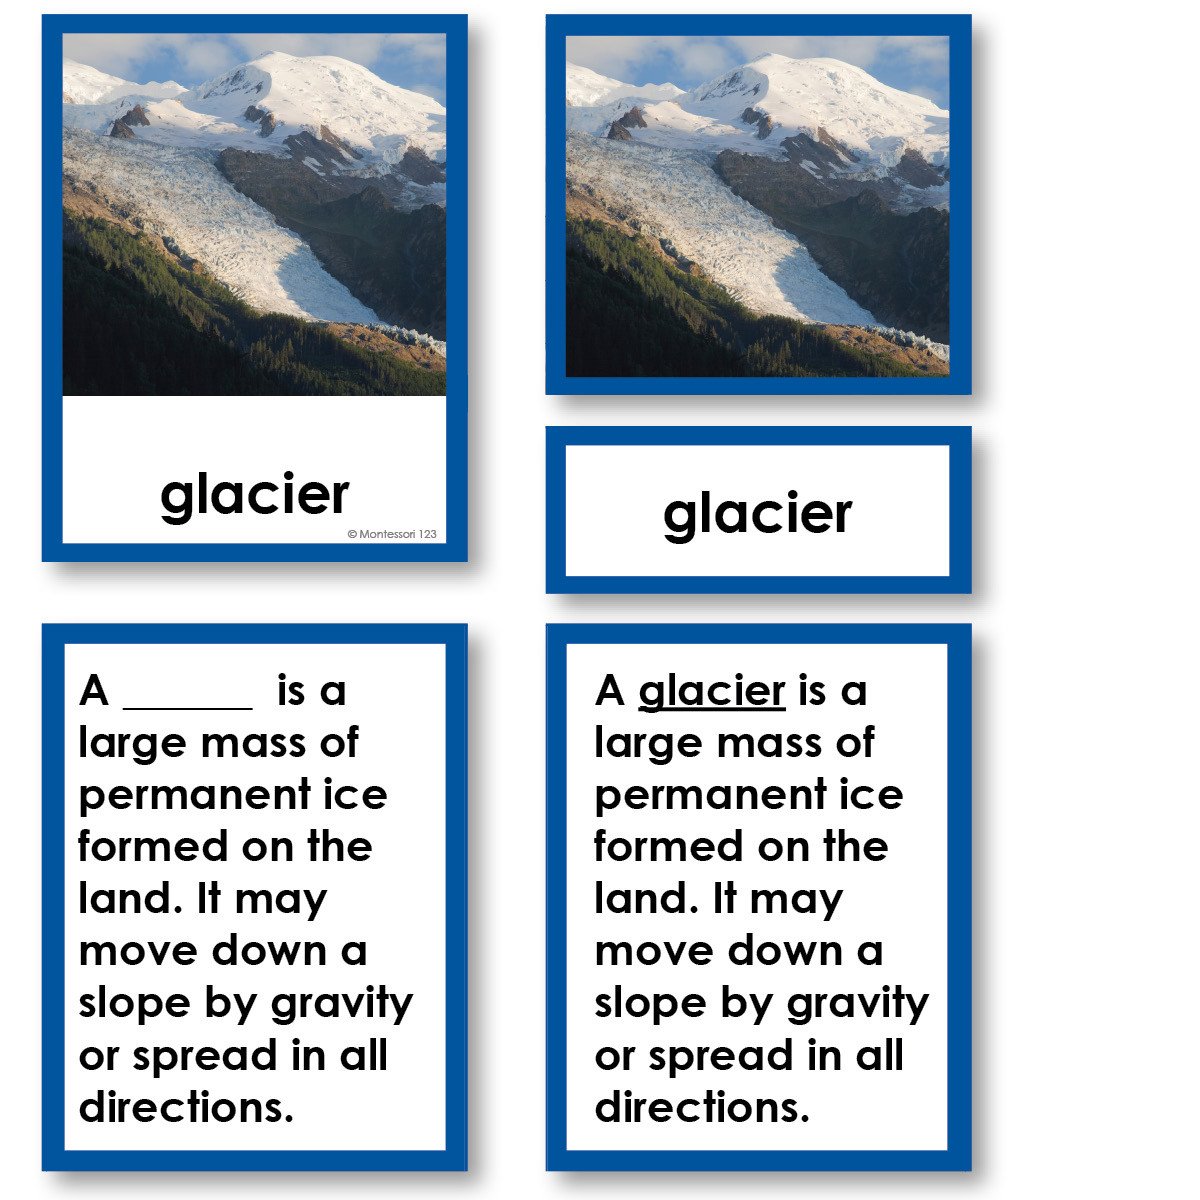 Geography Material-Landforms & Biomes - Parts Of A Glacier 3-Part Cards With Definitions